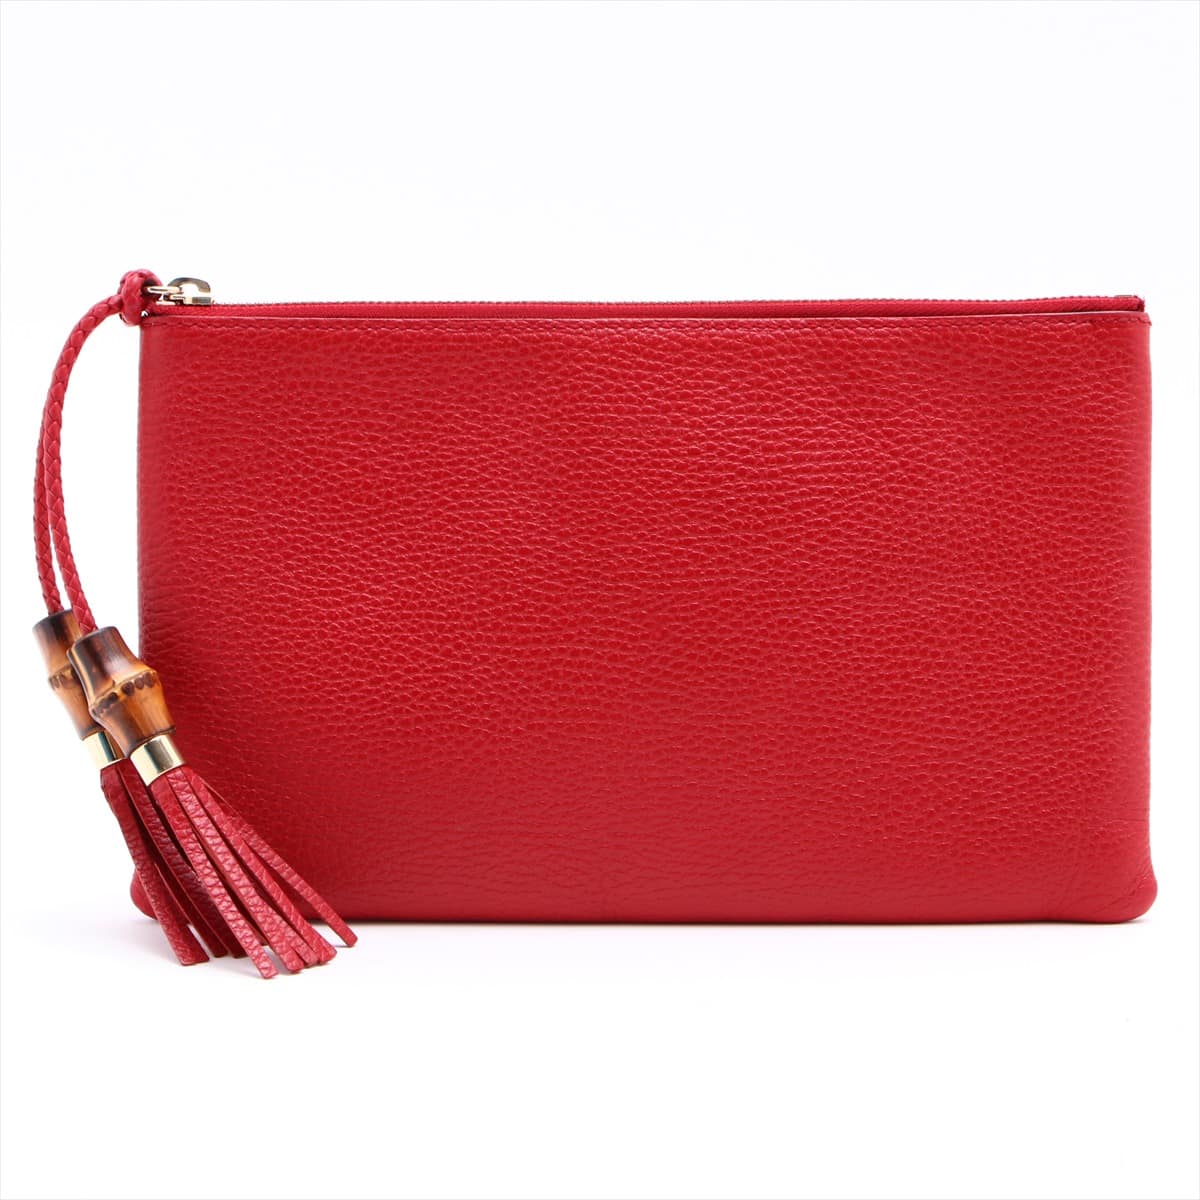 Gucci Bamboo Tassel Leather Clutch bag Red 449652